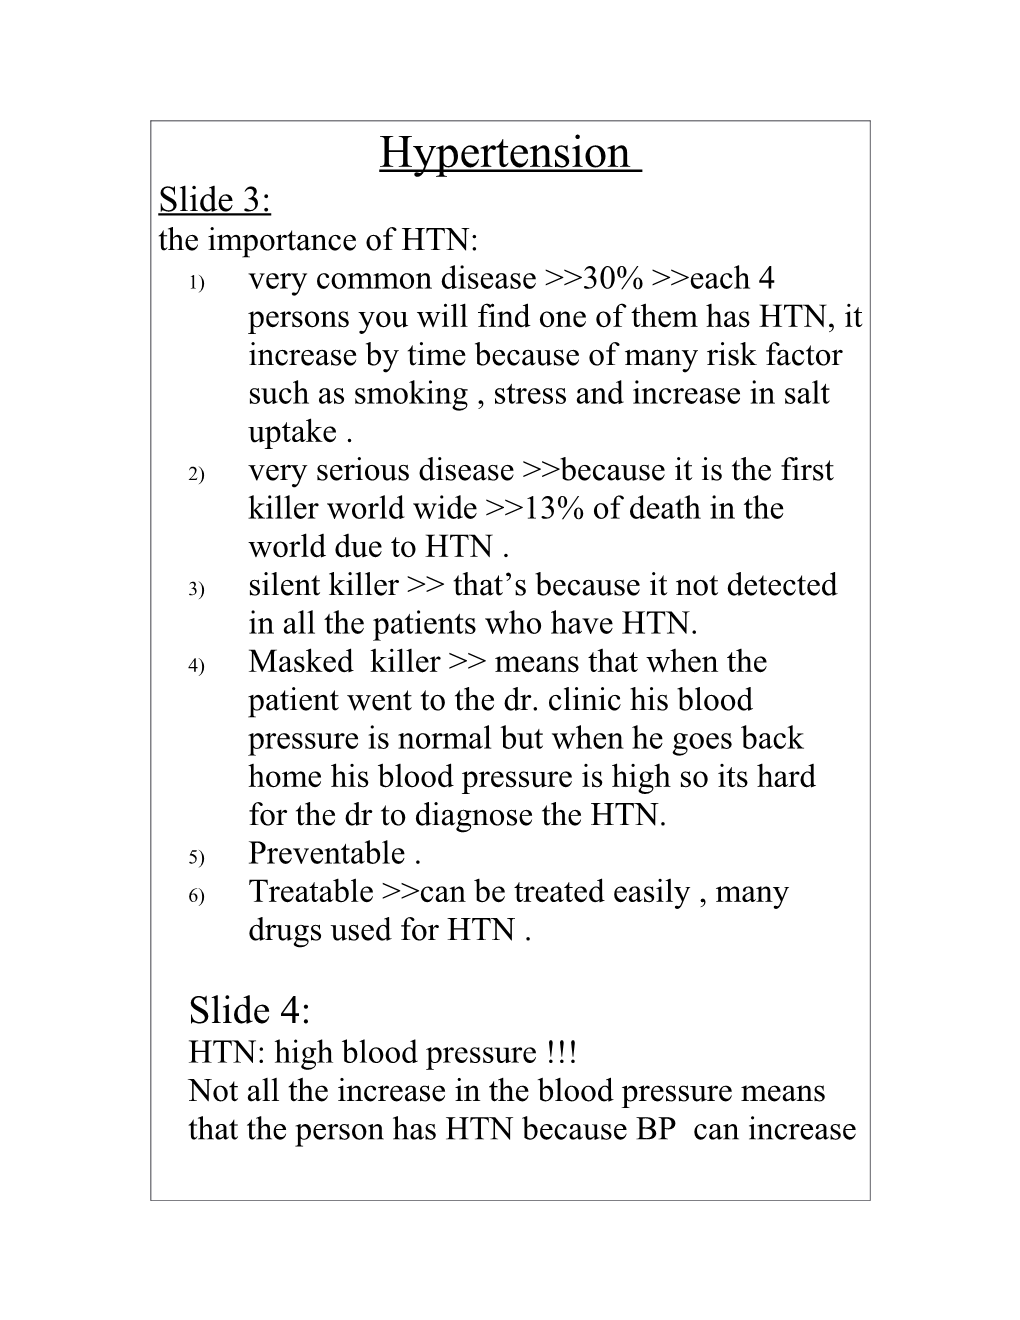 The Importance of HTN